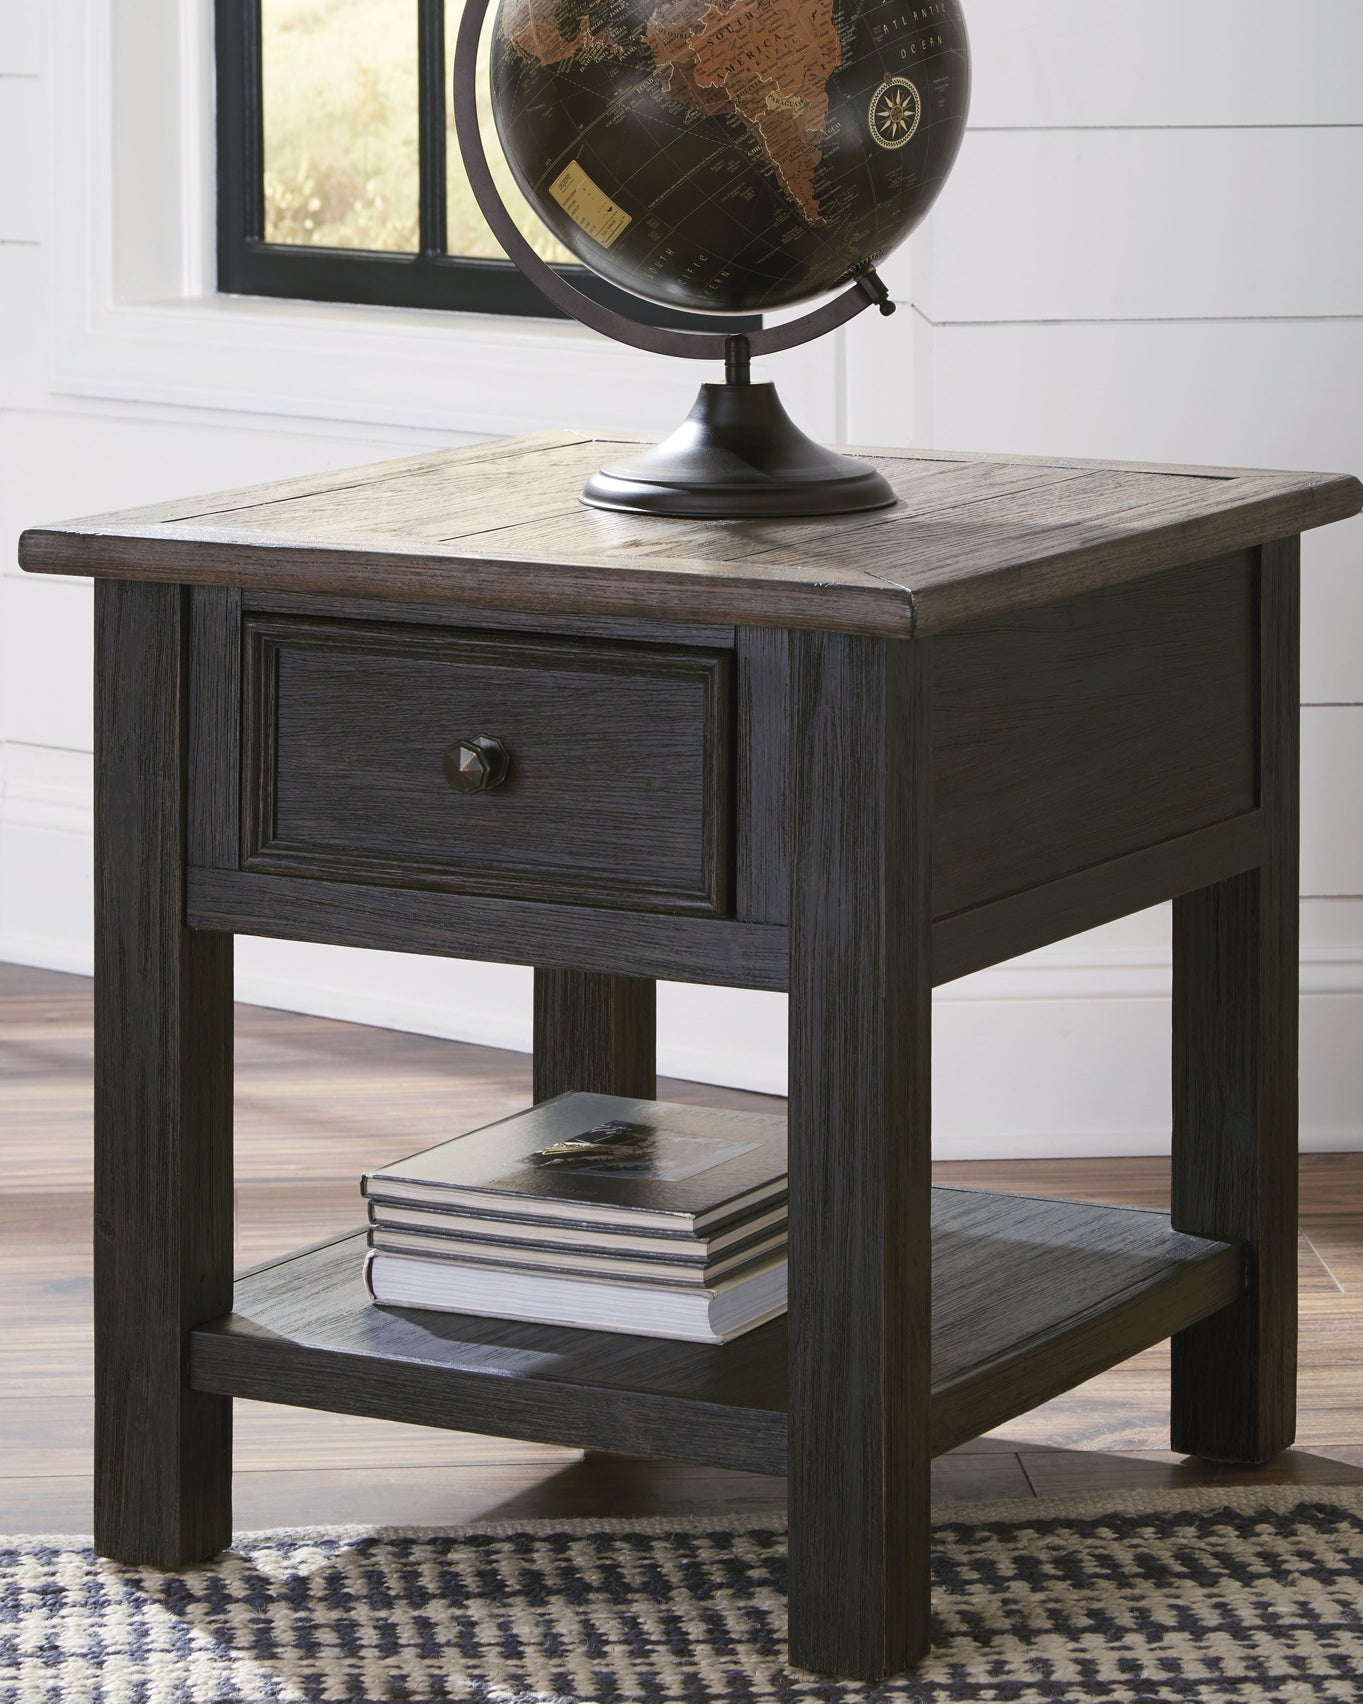 Tyler Creek Coffee Table with 2 End Tables Signature Design by Ashley®